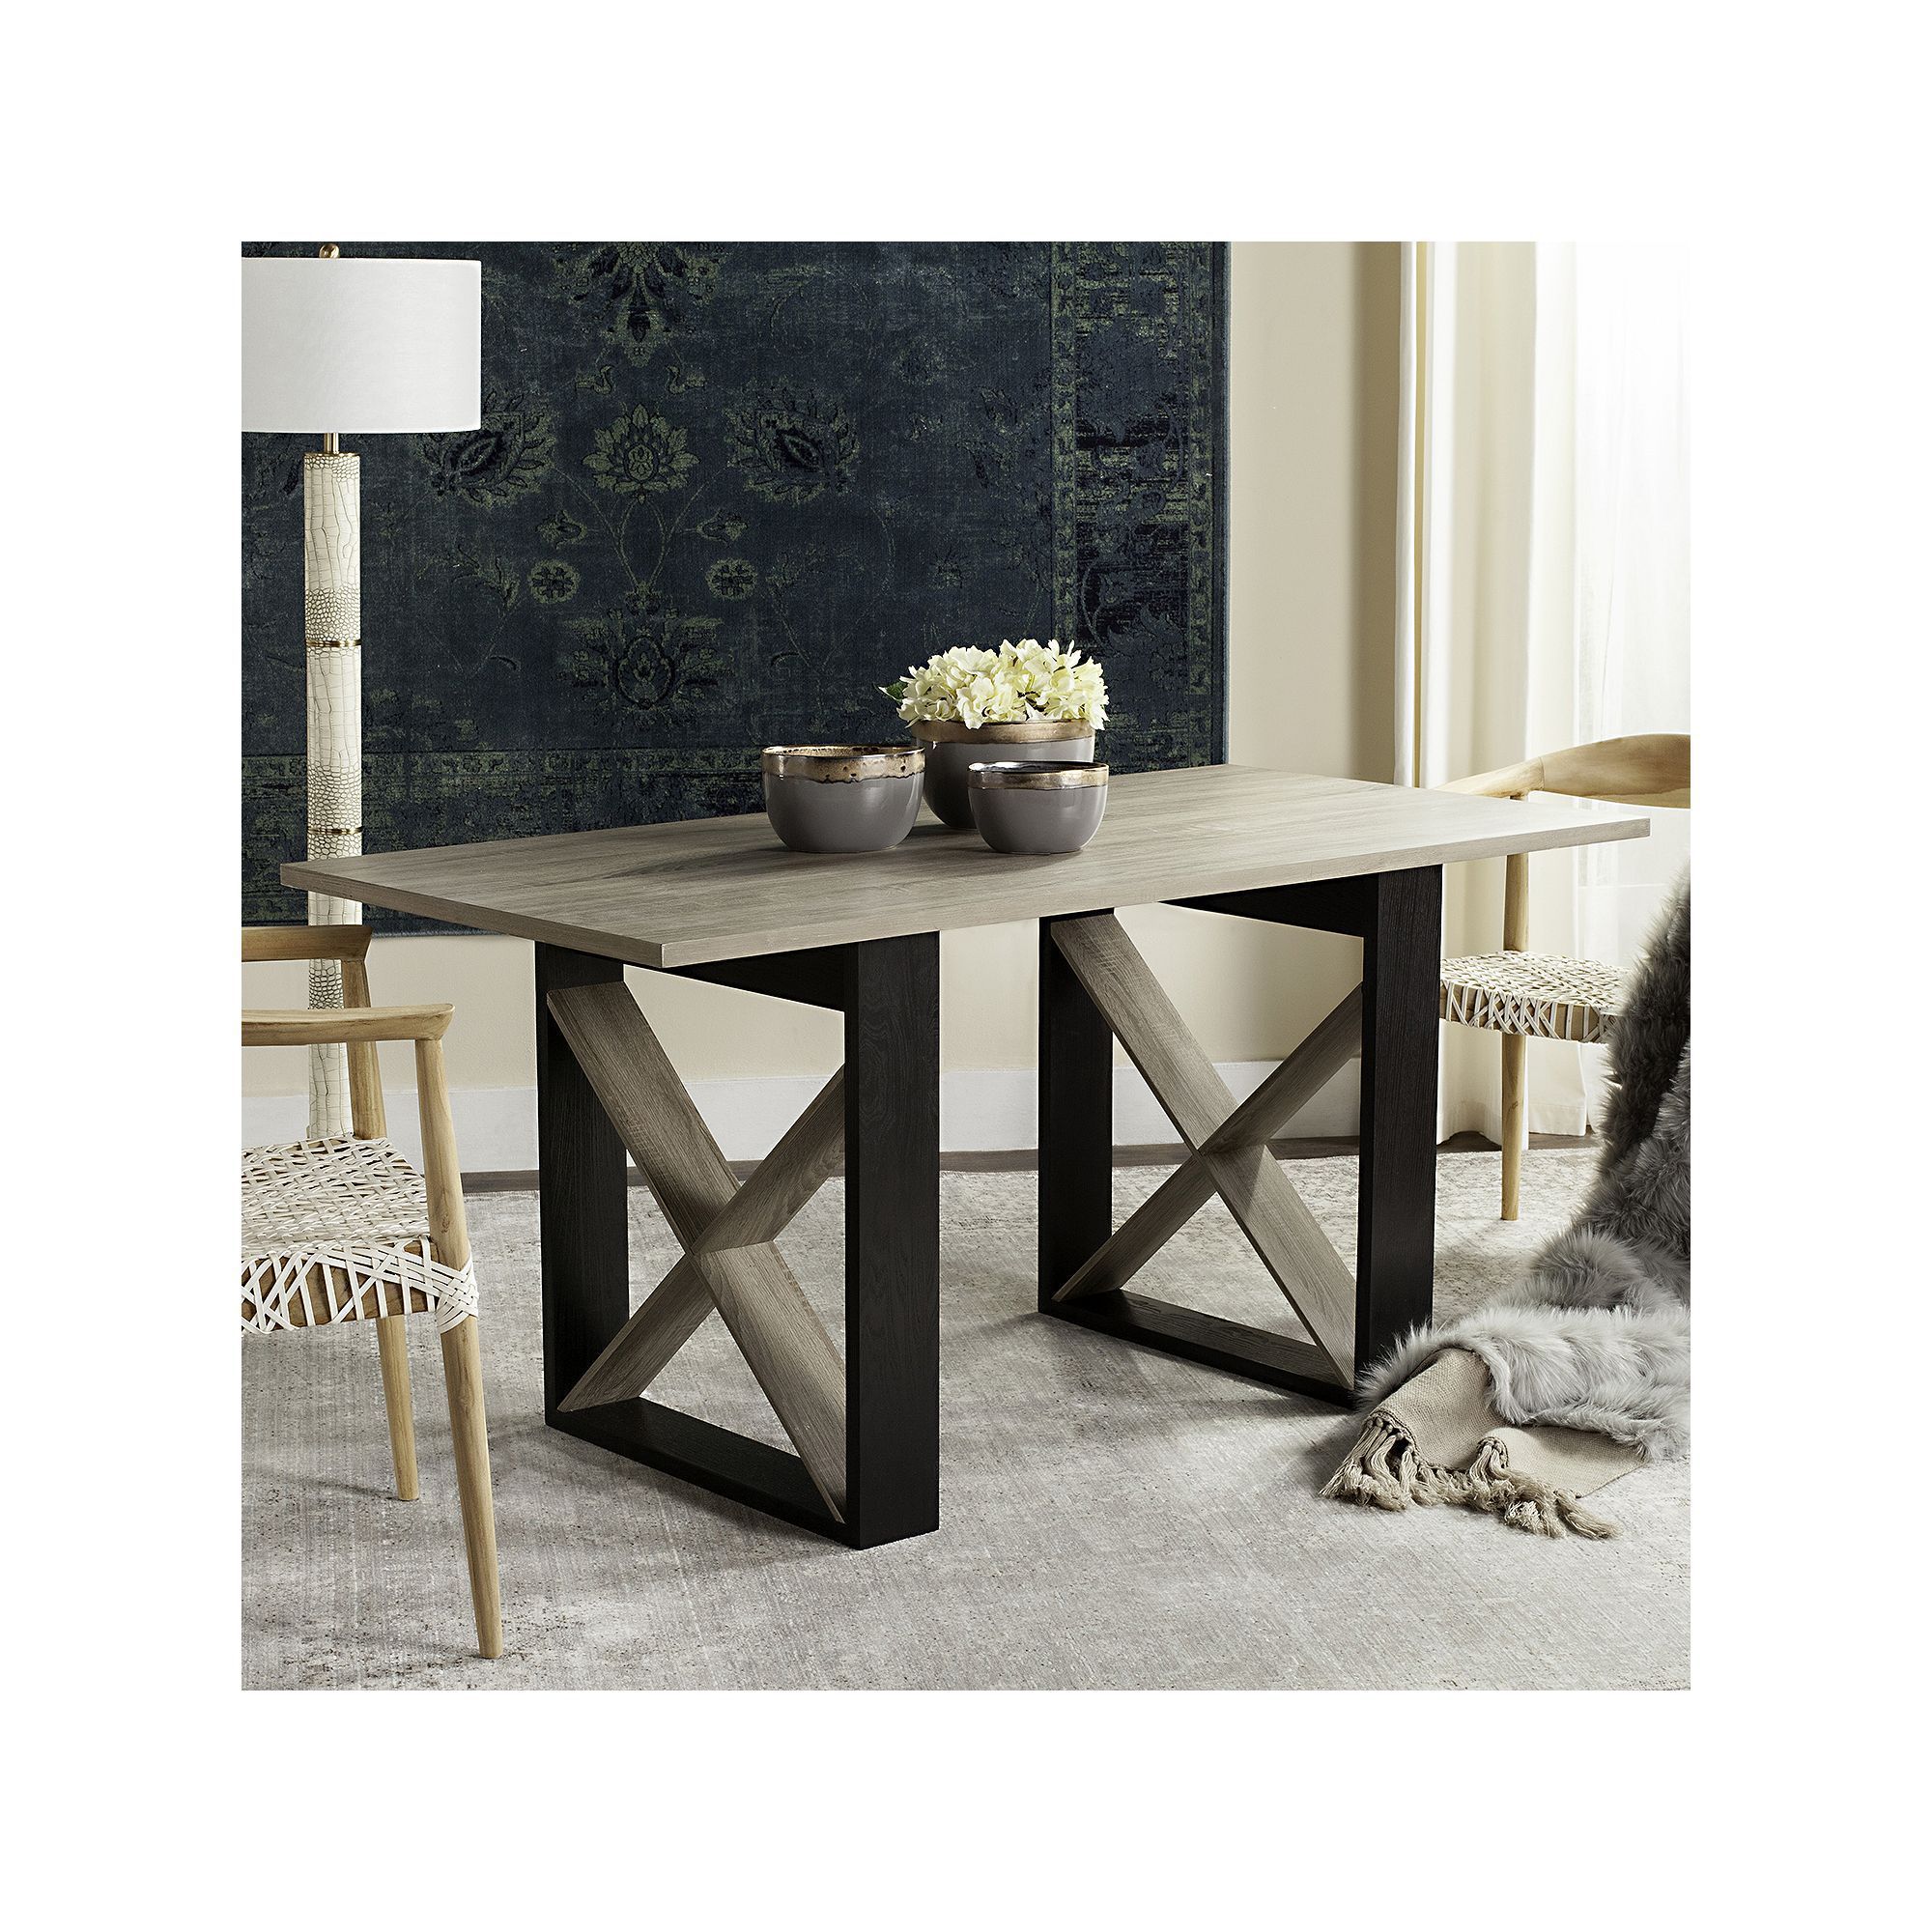 Safavieh Contemporary Modern Dining Table In 2019 | Products Intended For Current Tavarez 5 Piece Dining Sets (View 16 of 20)